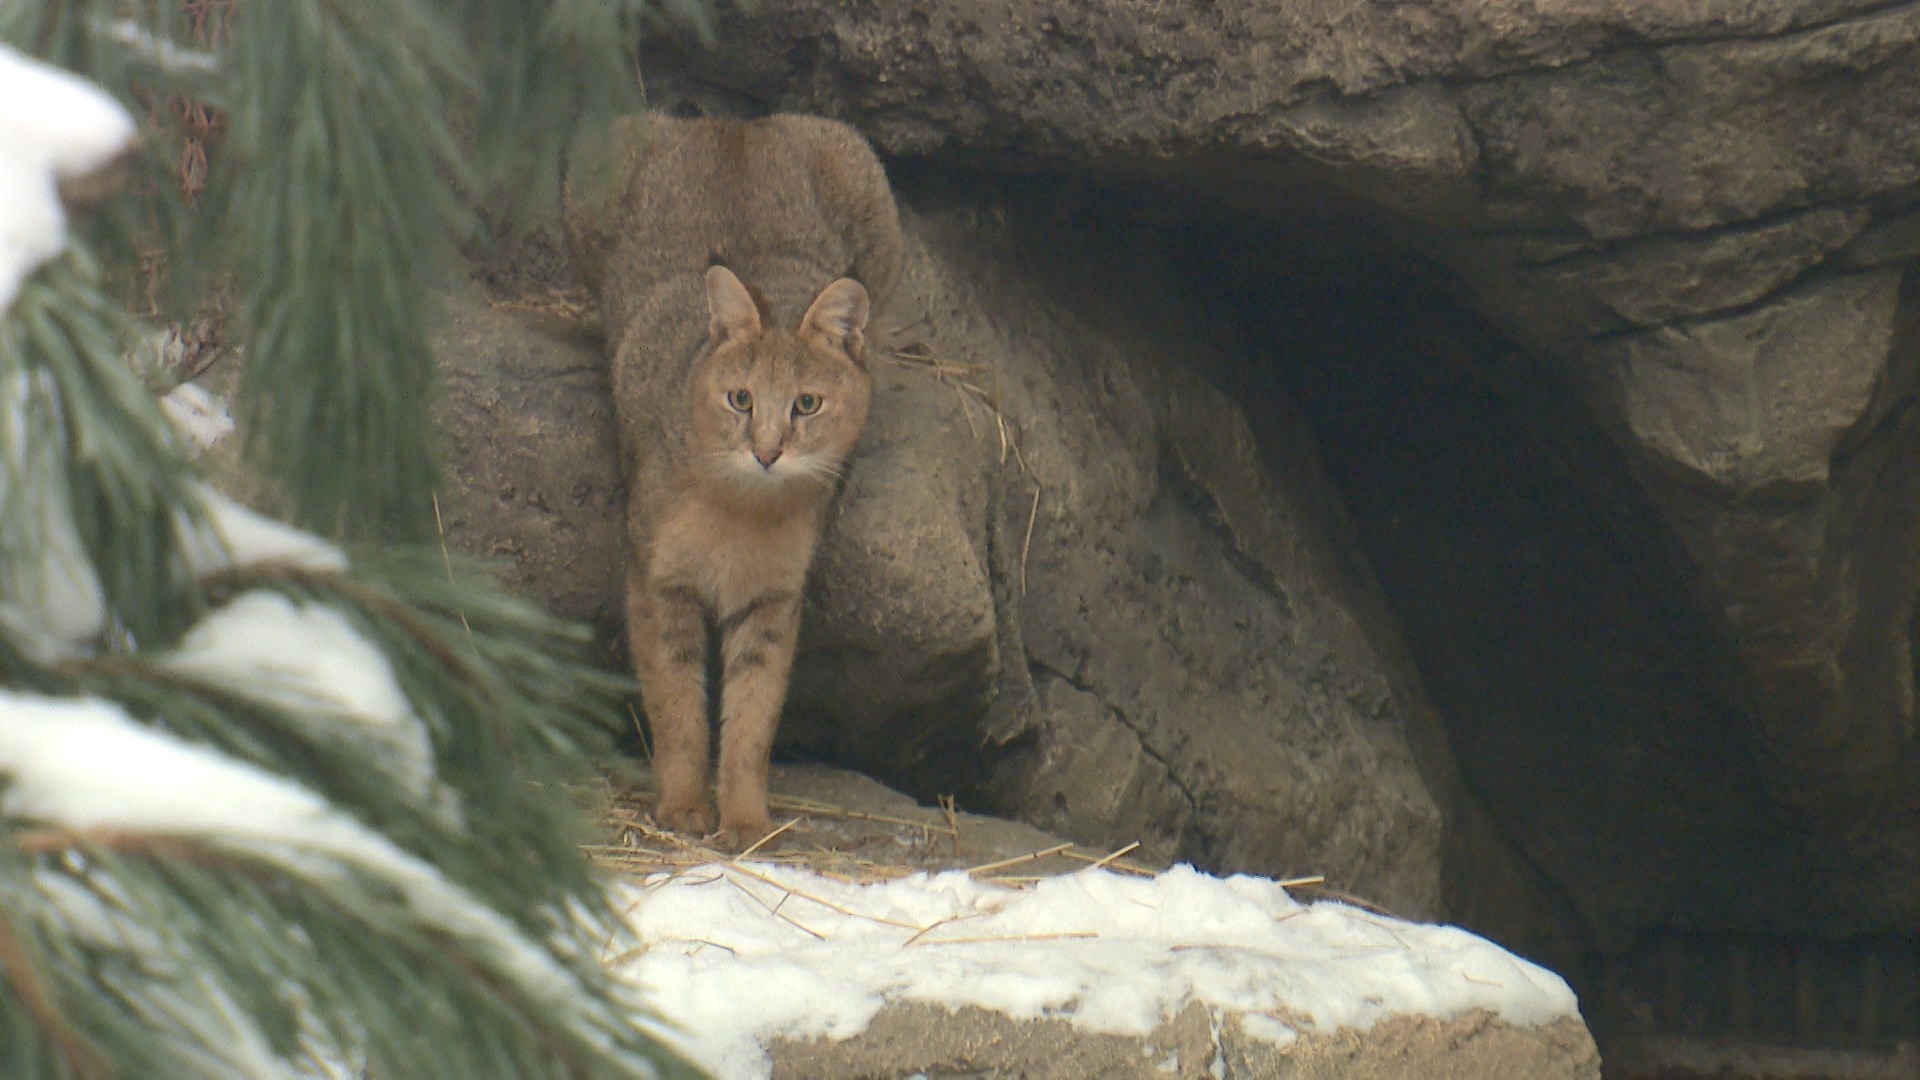 Swamp lynx came to live in Minsk zoo